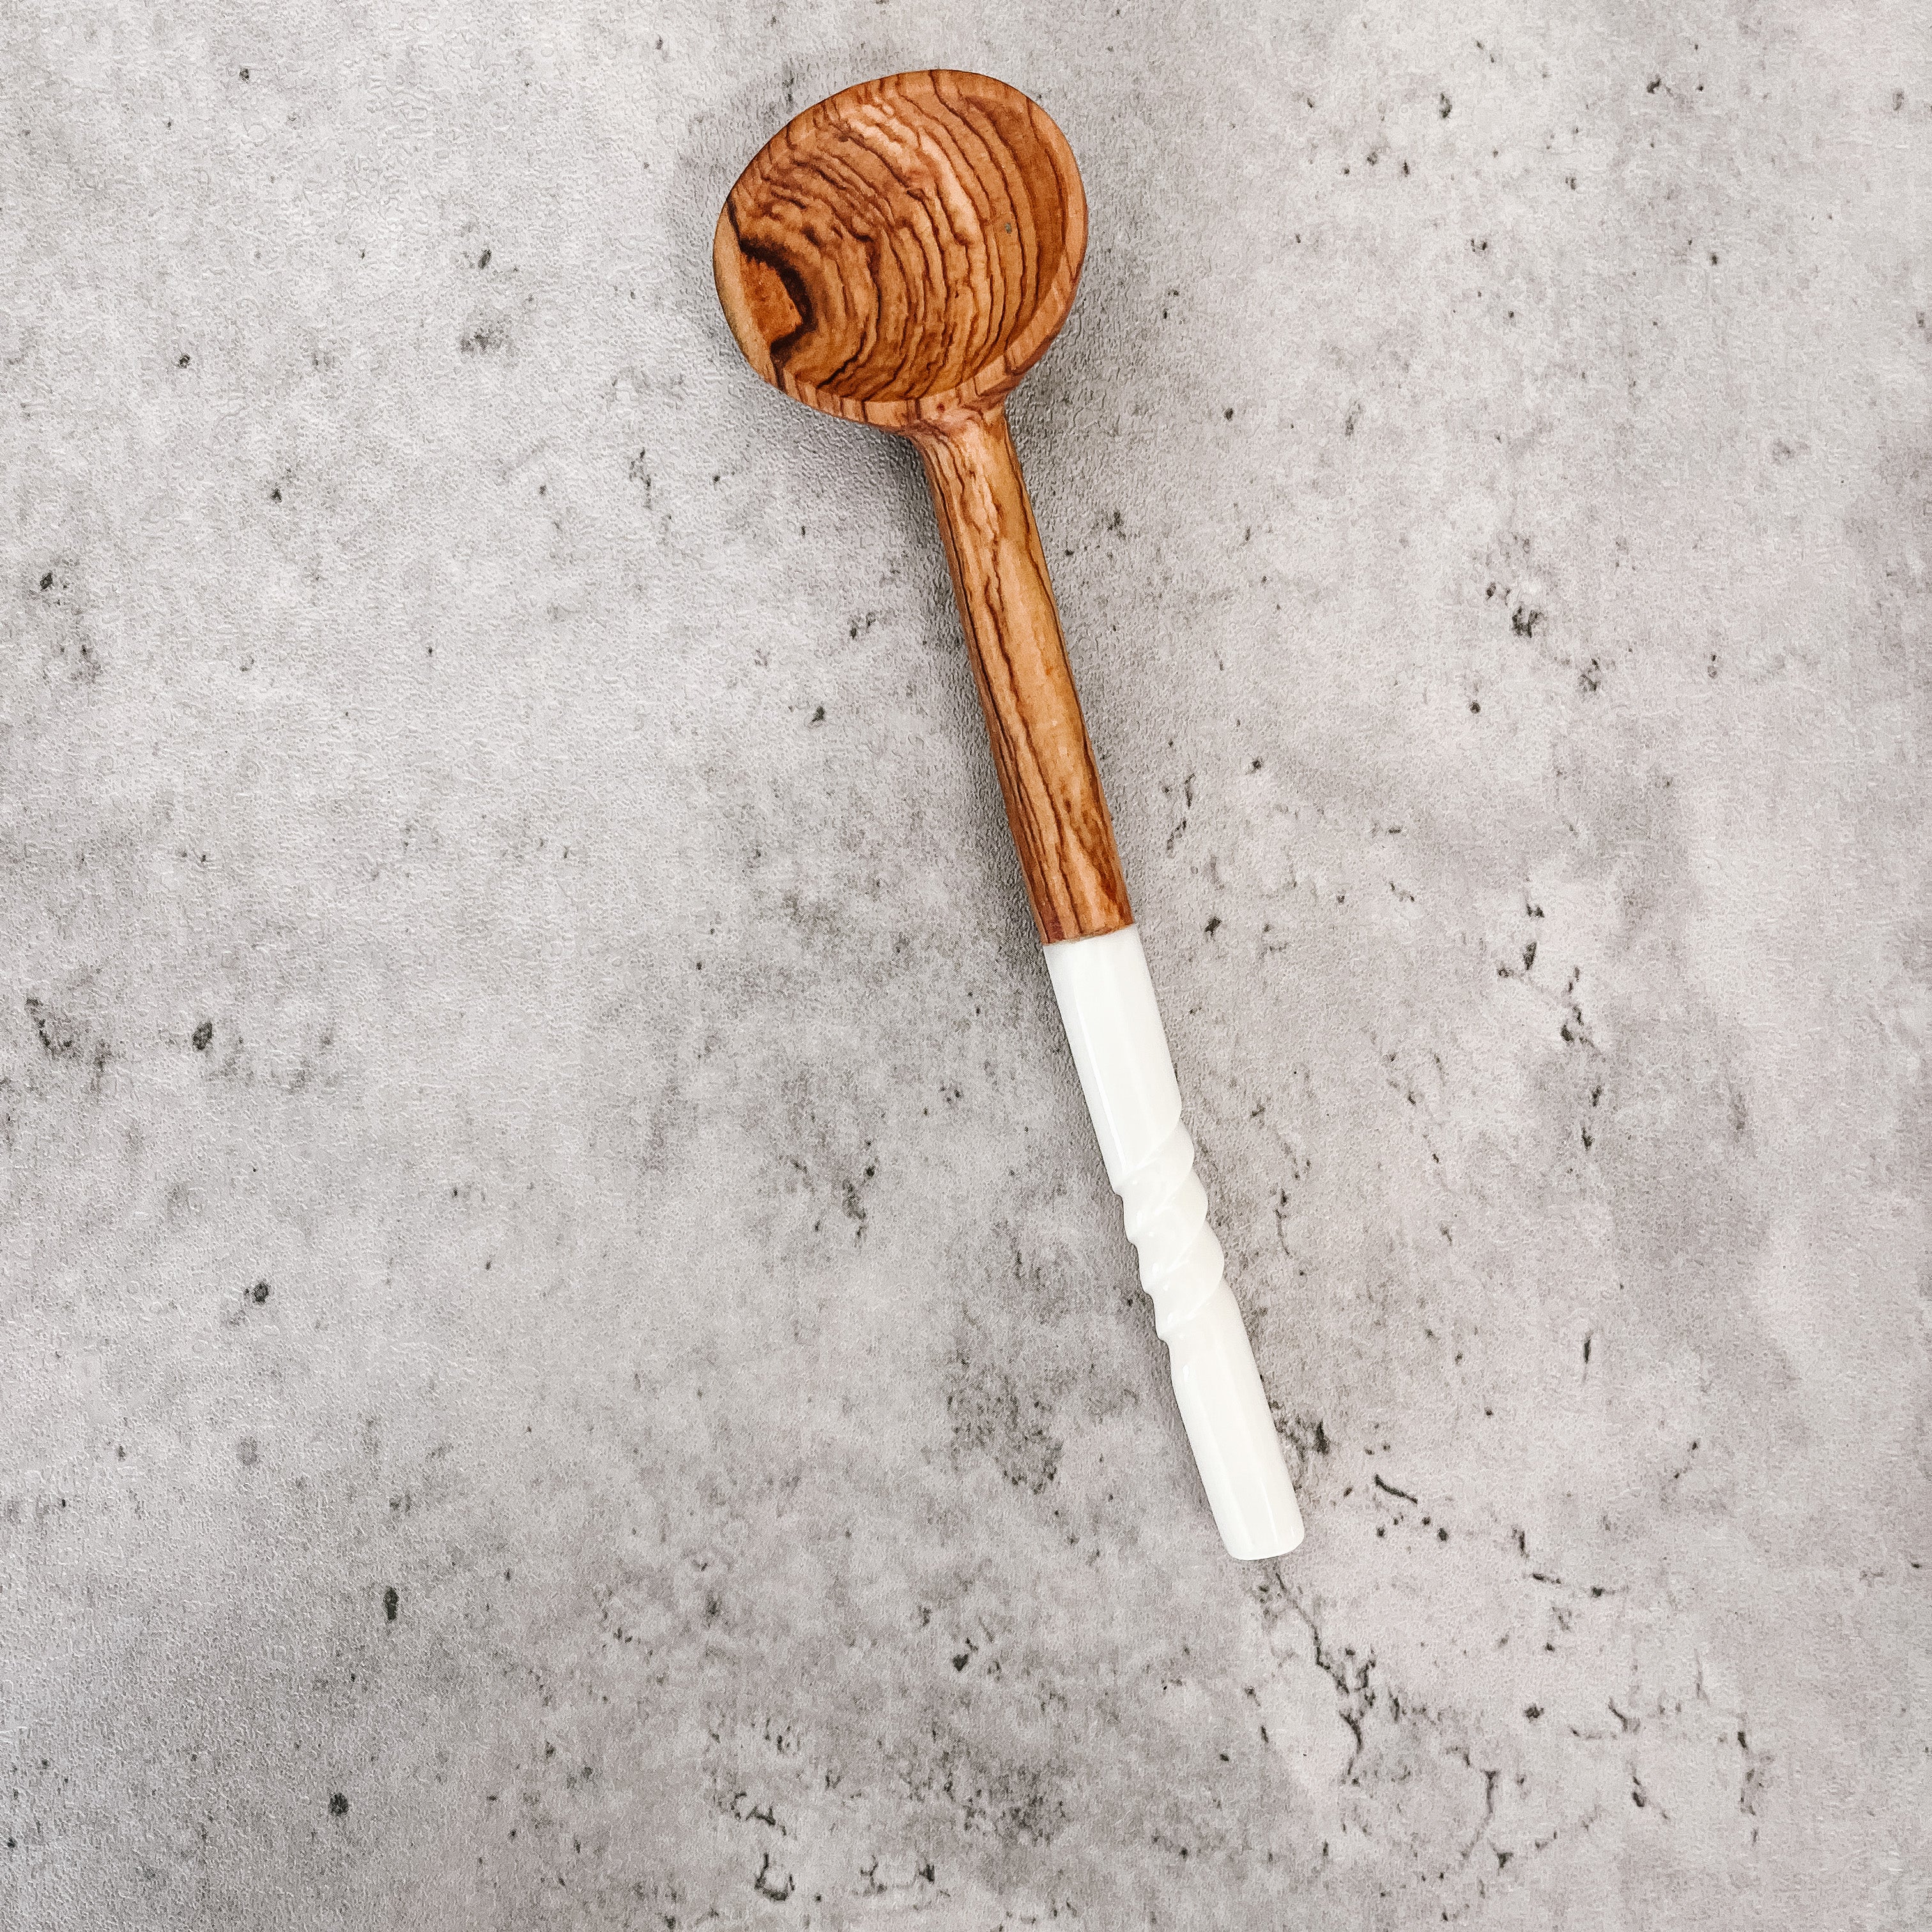 JustOne's small handcrafted, wooden, coffee spoon with handle made of ethically sourced bone, made in Kenya